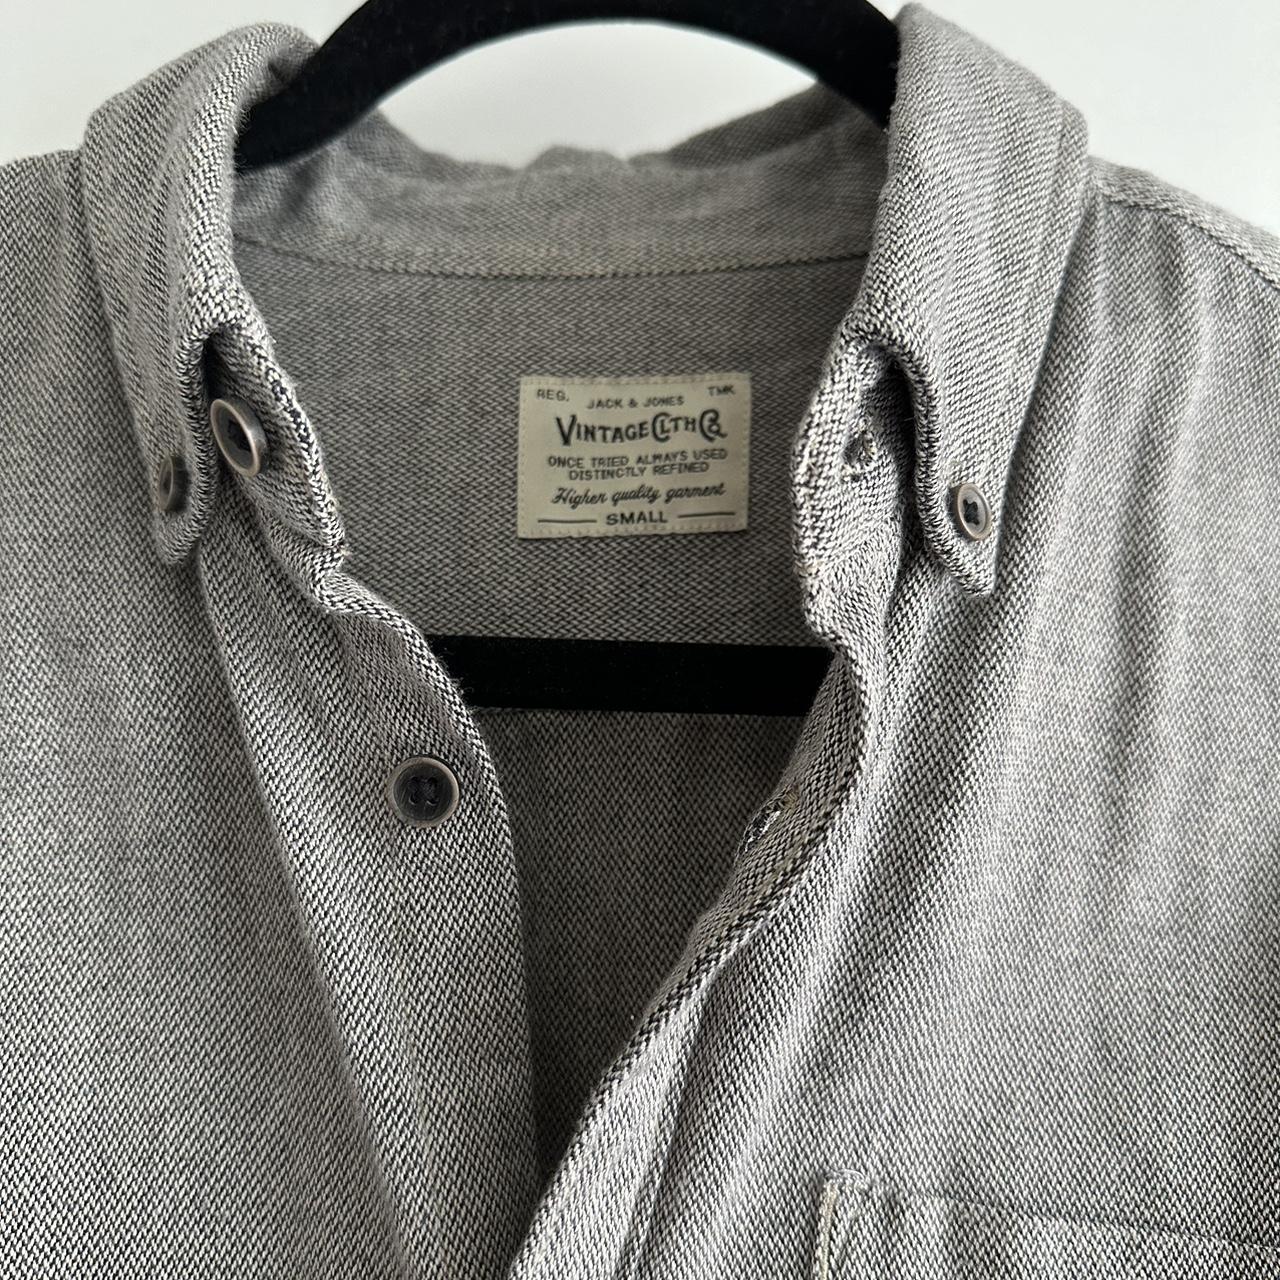 Jack and Jones vintage cloth in men’s small and grey... - Depop